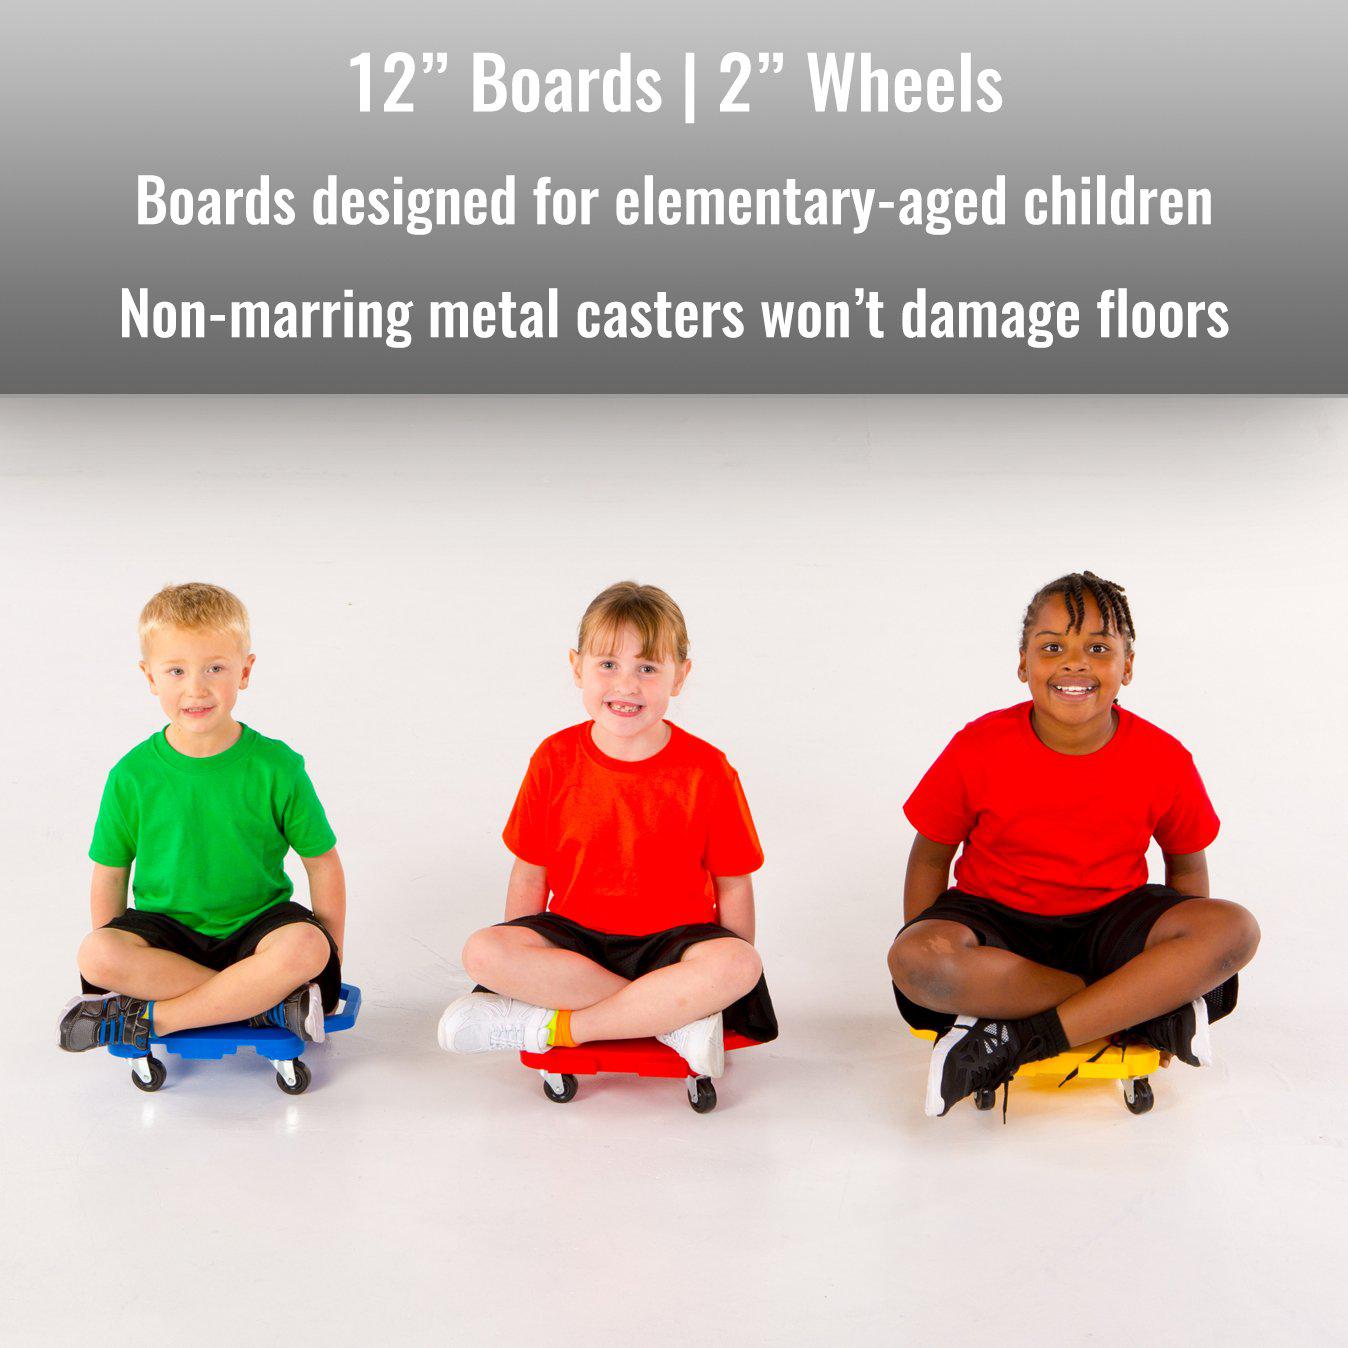 Cramer cosom scooter board set, 12 inch children's sit & scoot board with 2 inch non-marring metal casters & safety guards for physi